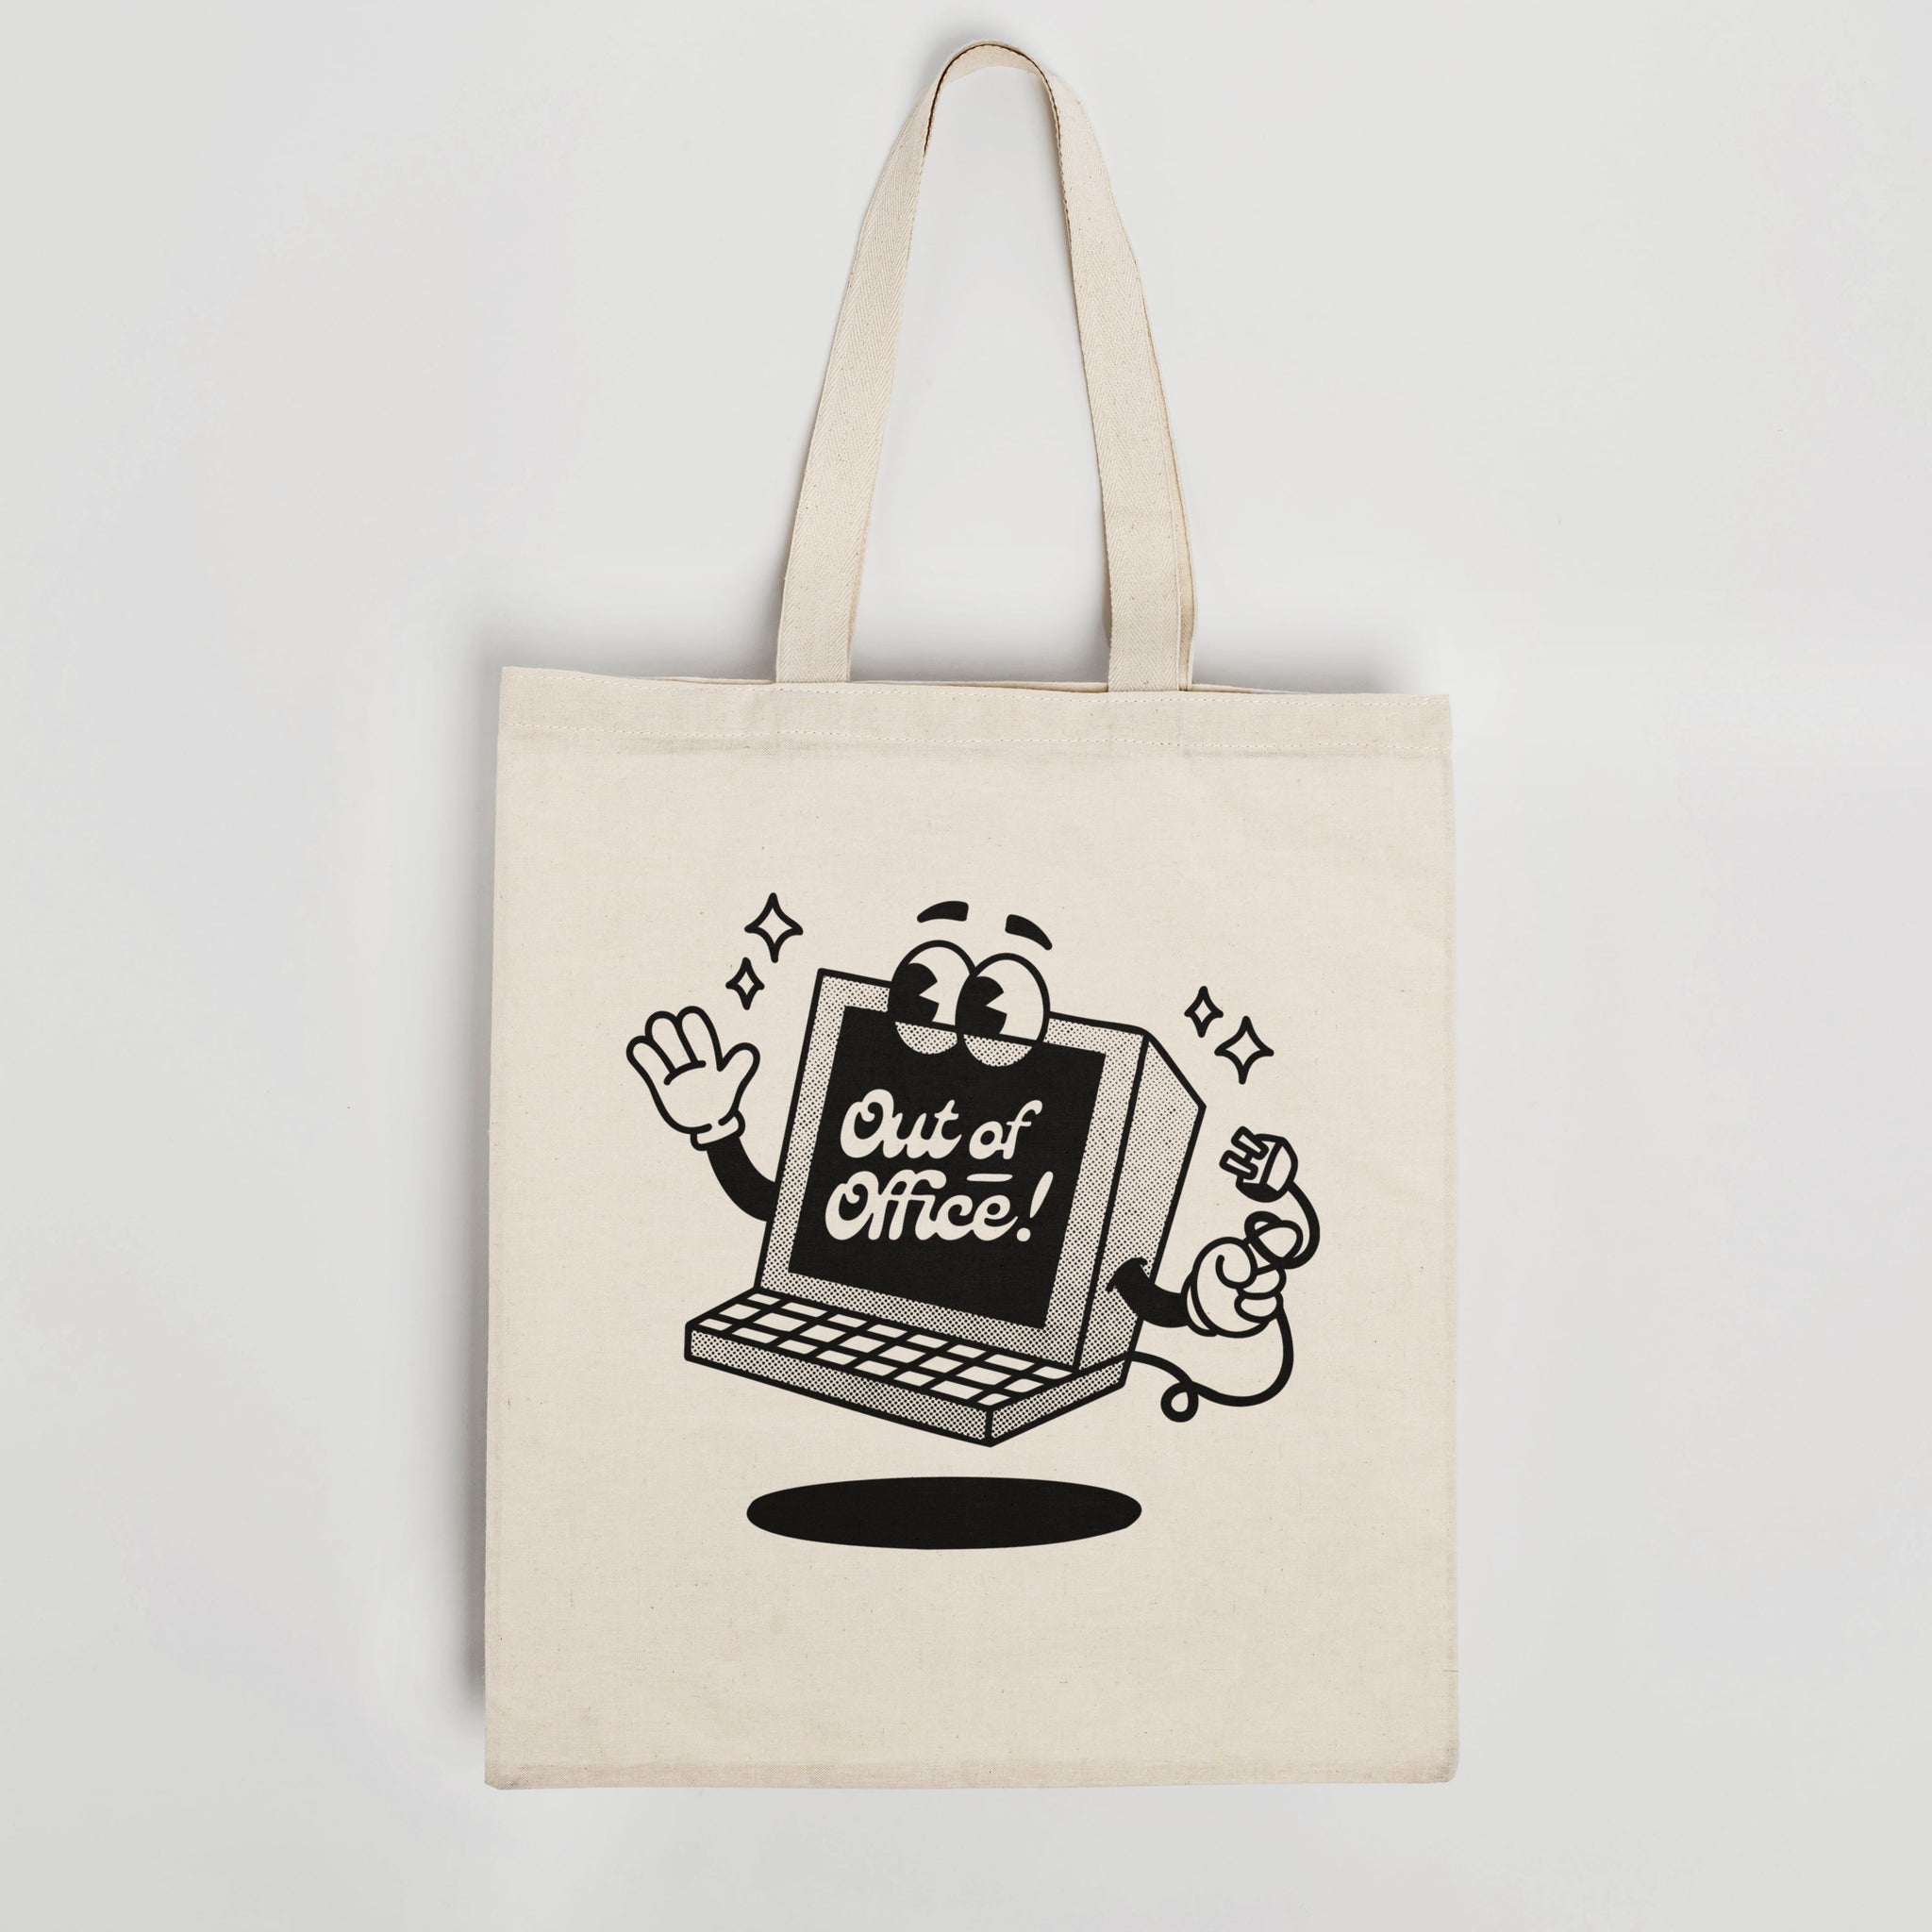 'Out Of Office' organic cotton canvas tote bag